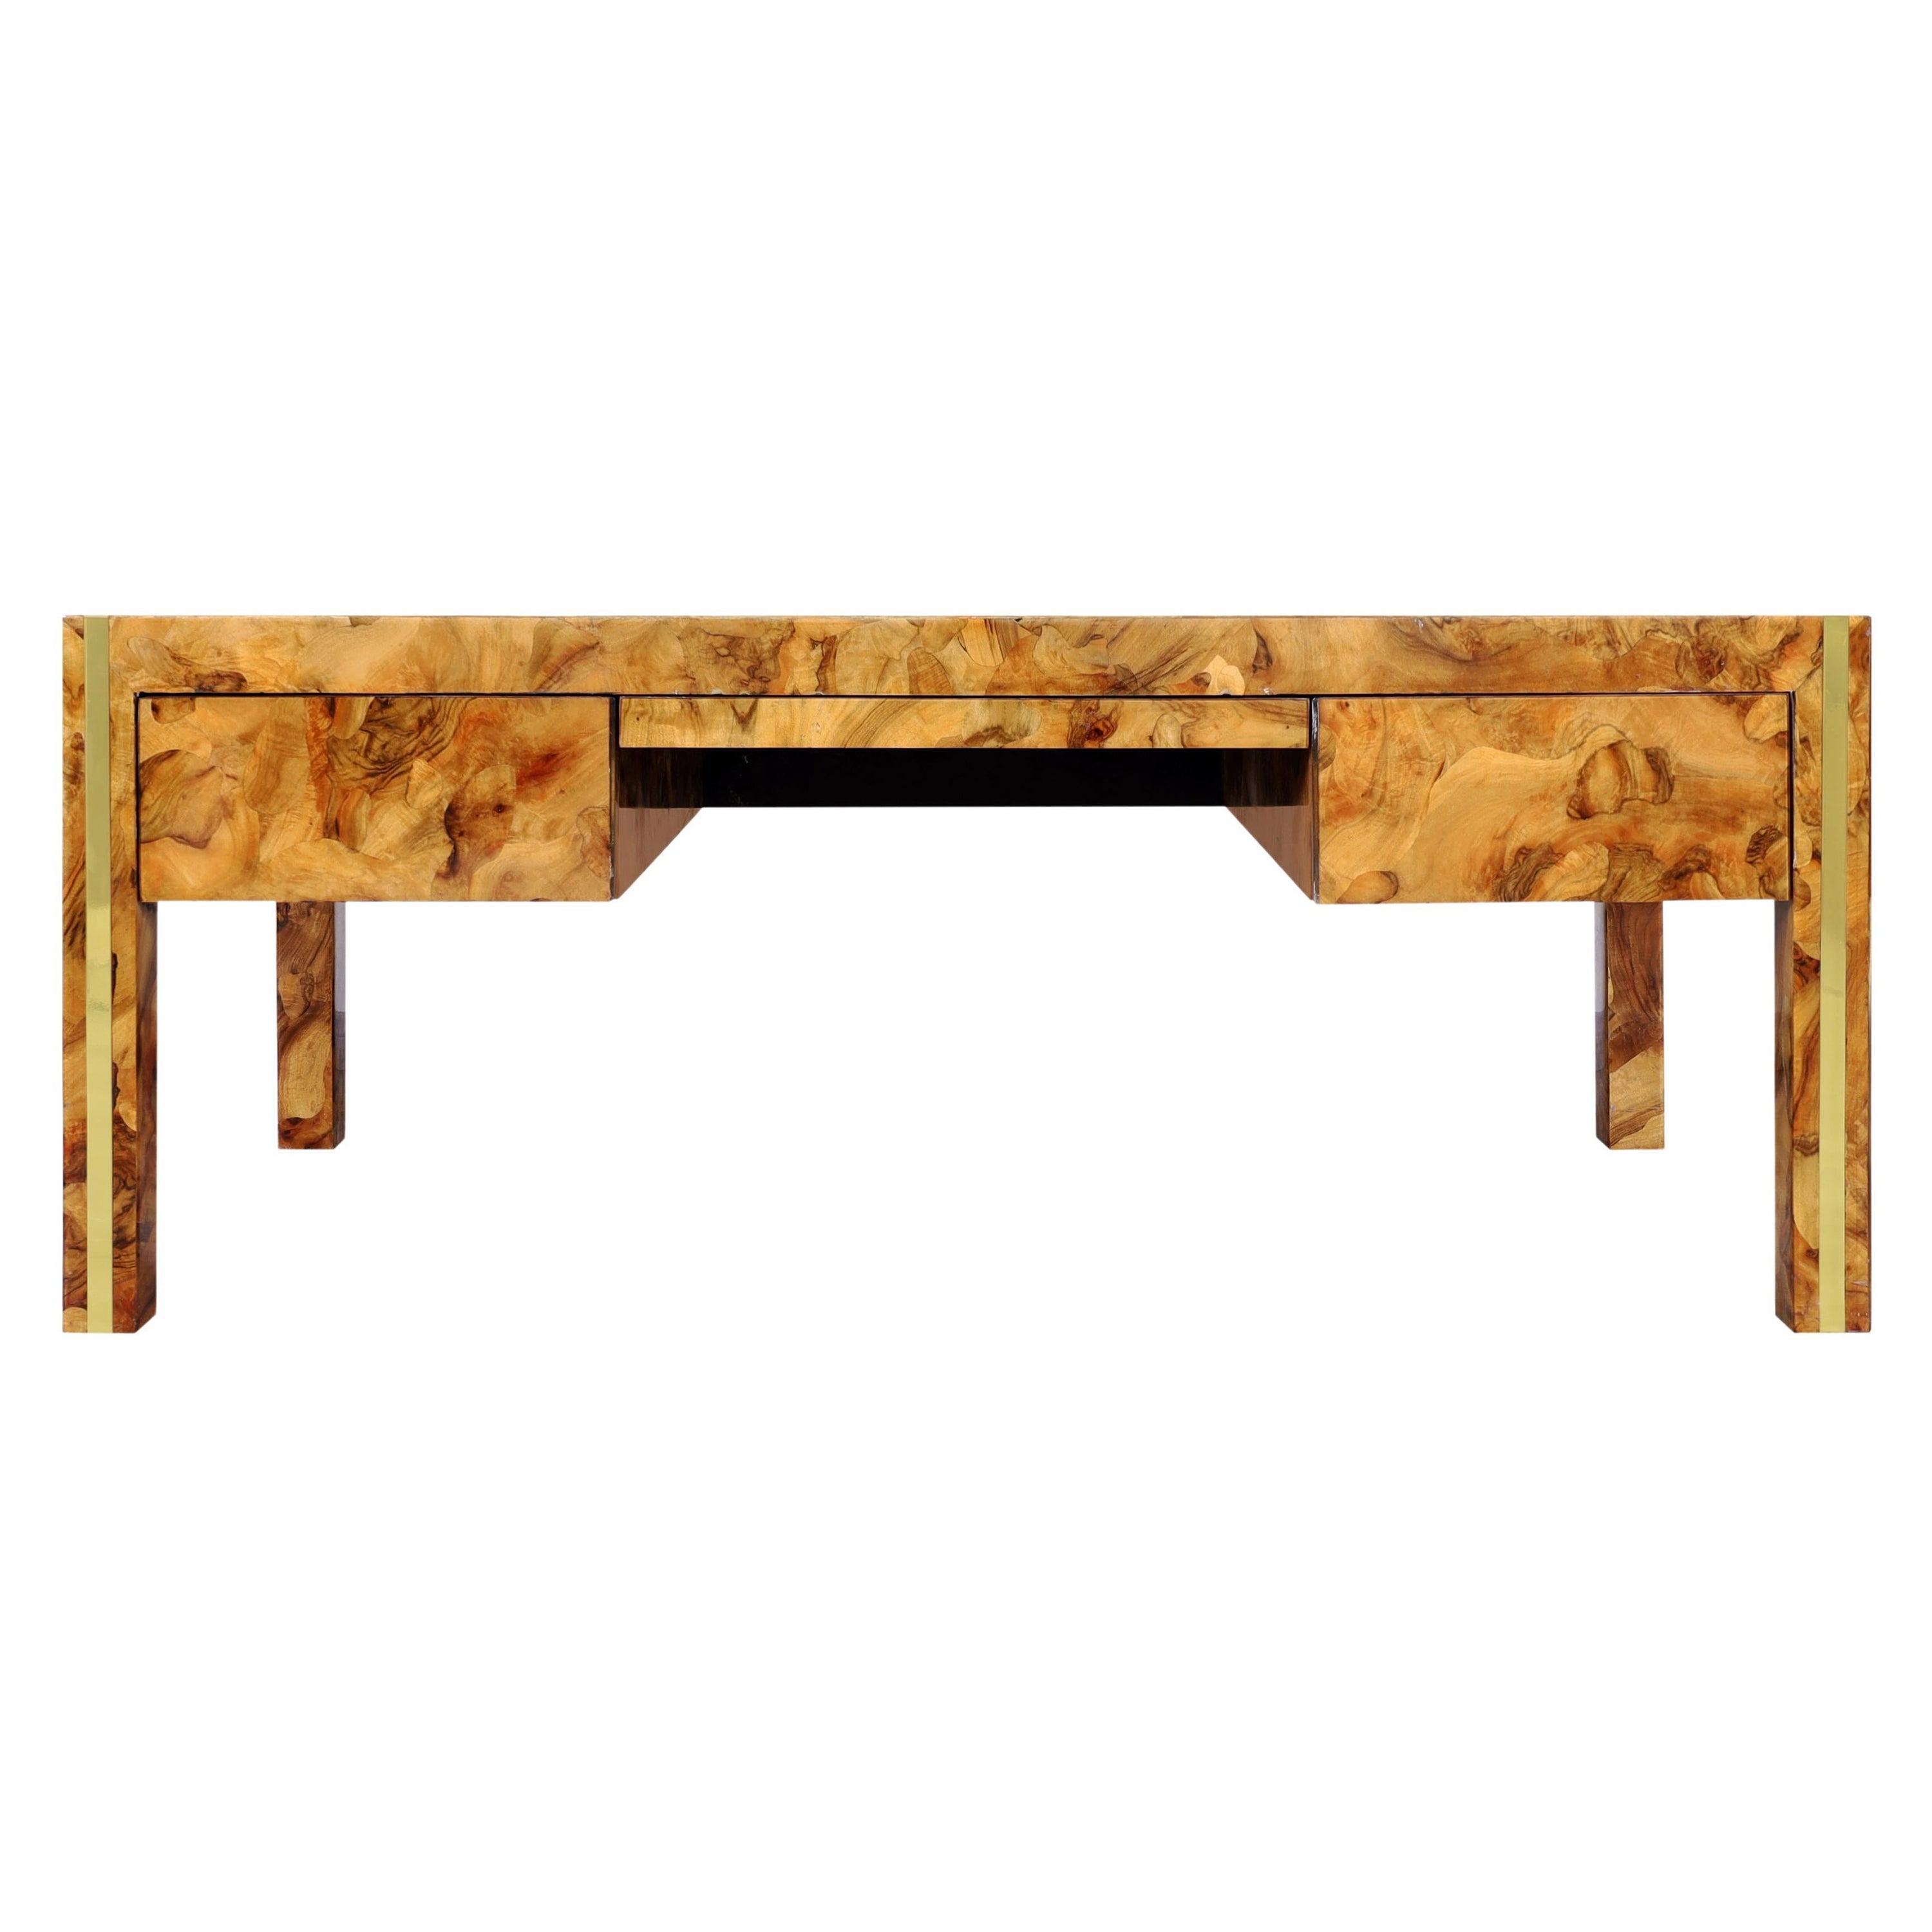 Monumental Burl Wood and Brass Executive Desk